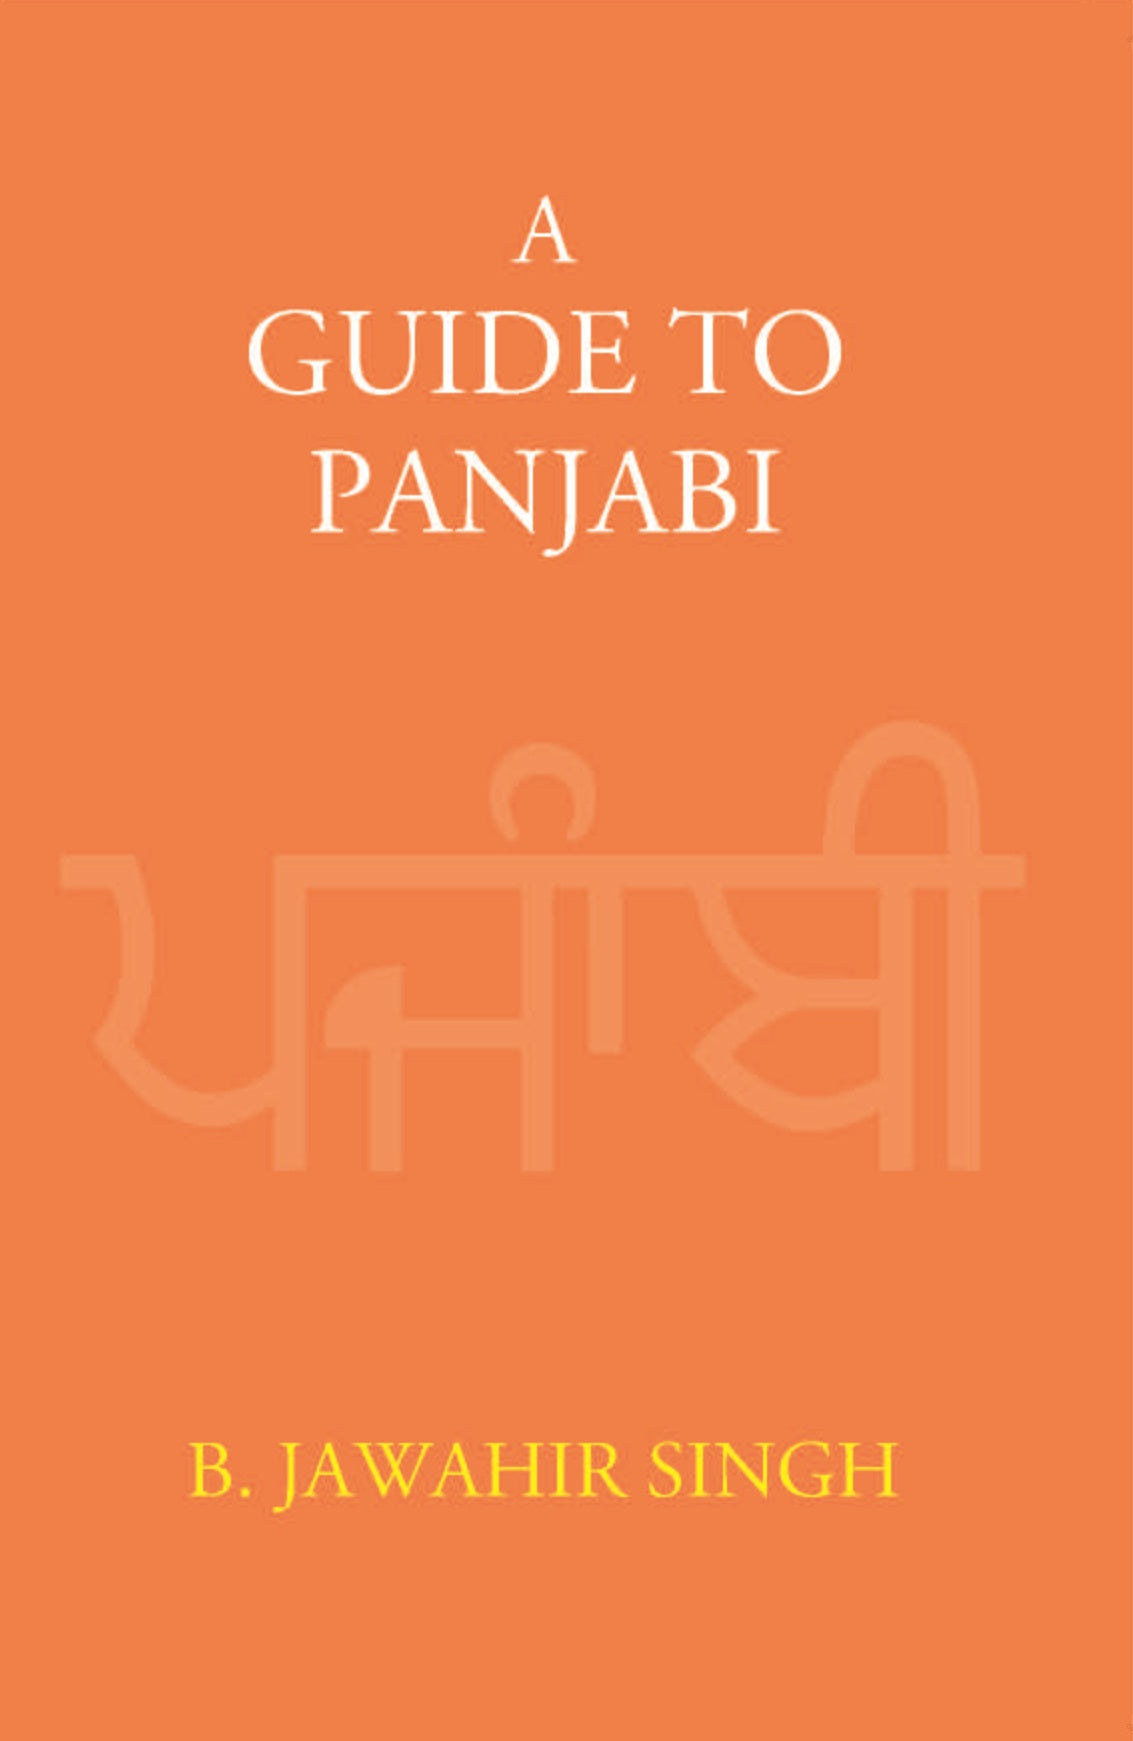 A Guide To Panjabi